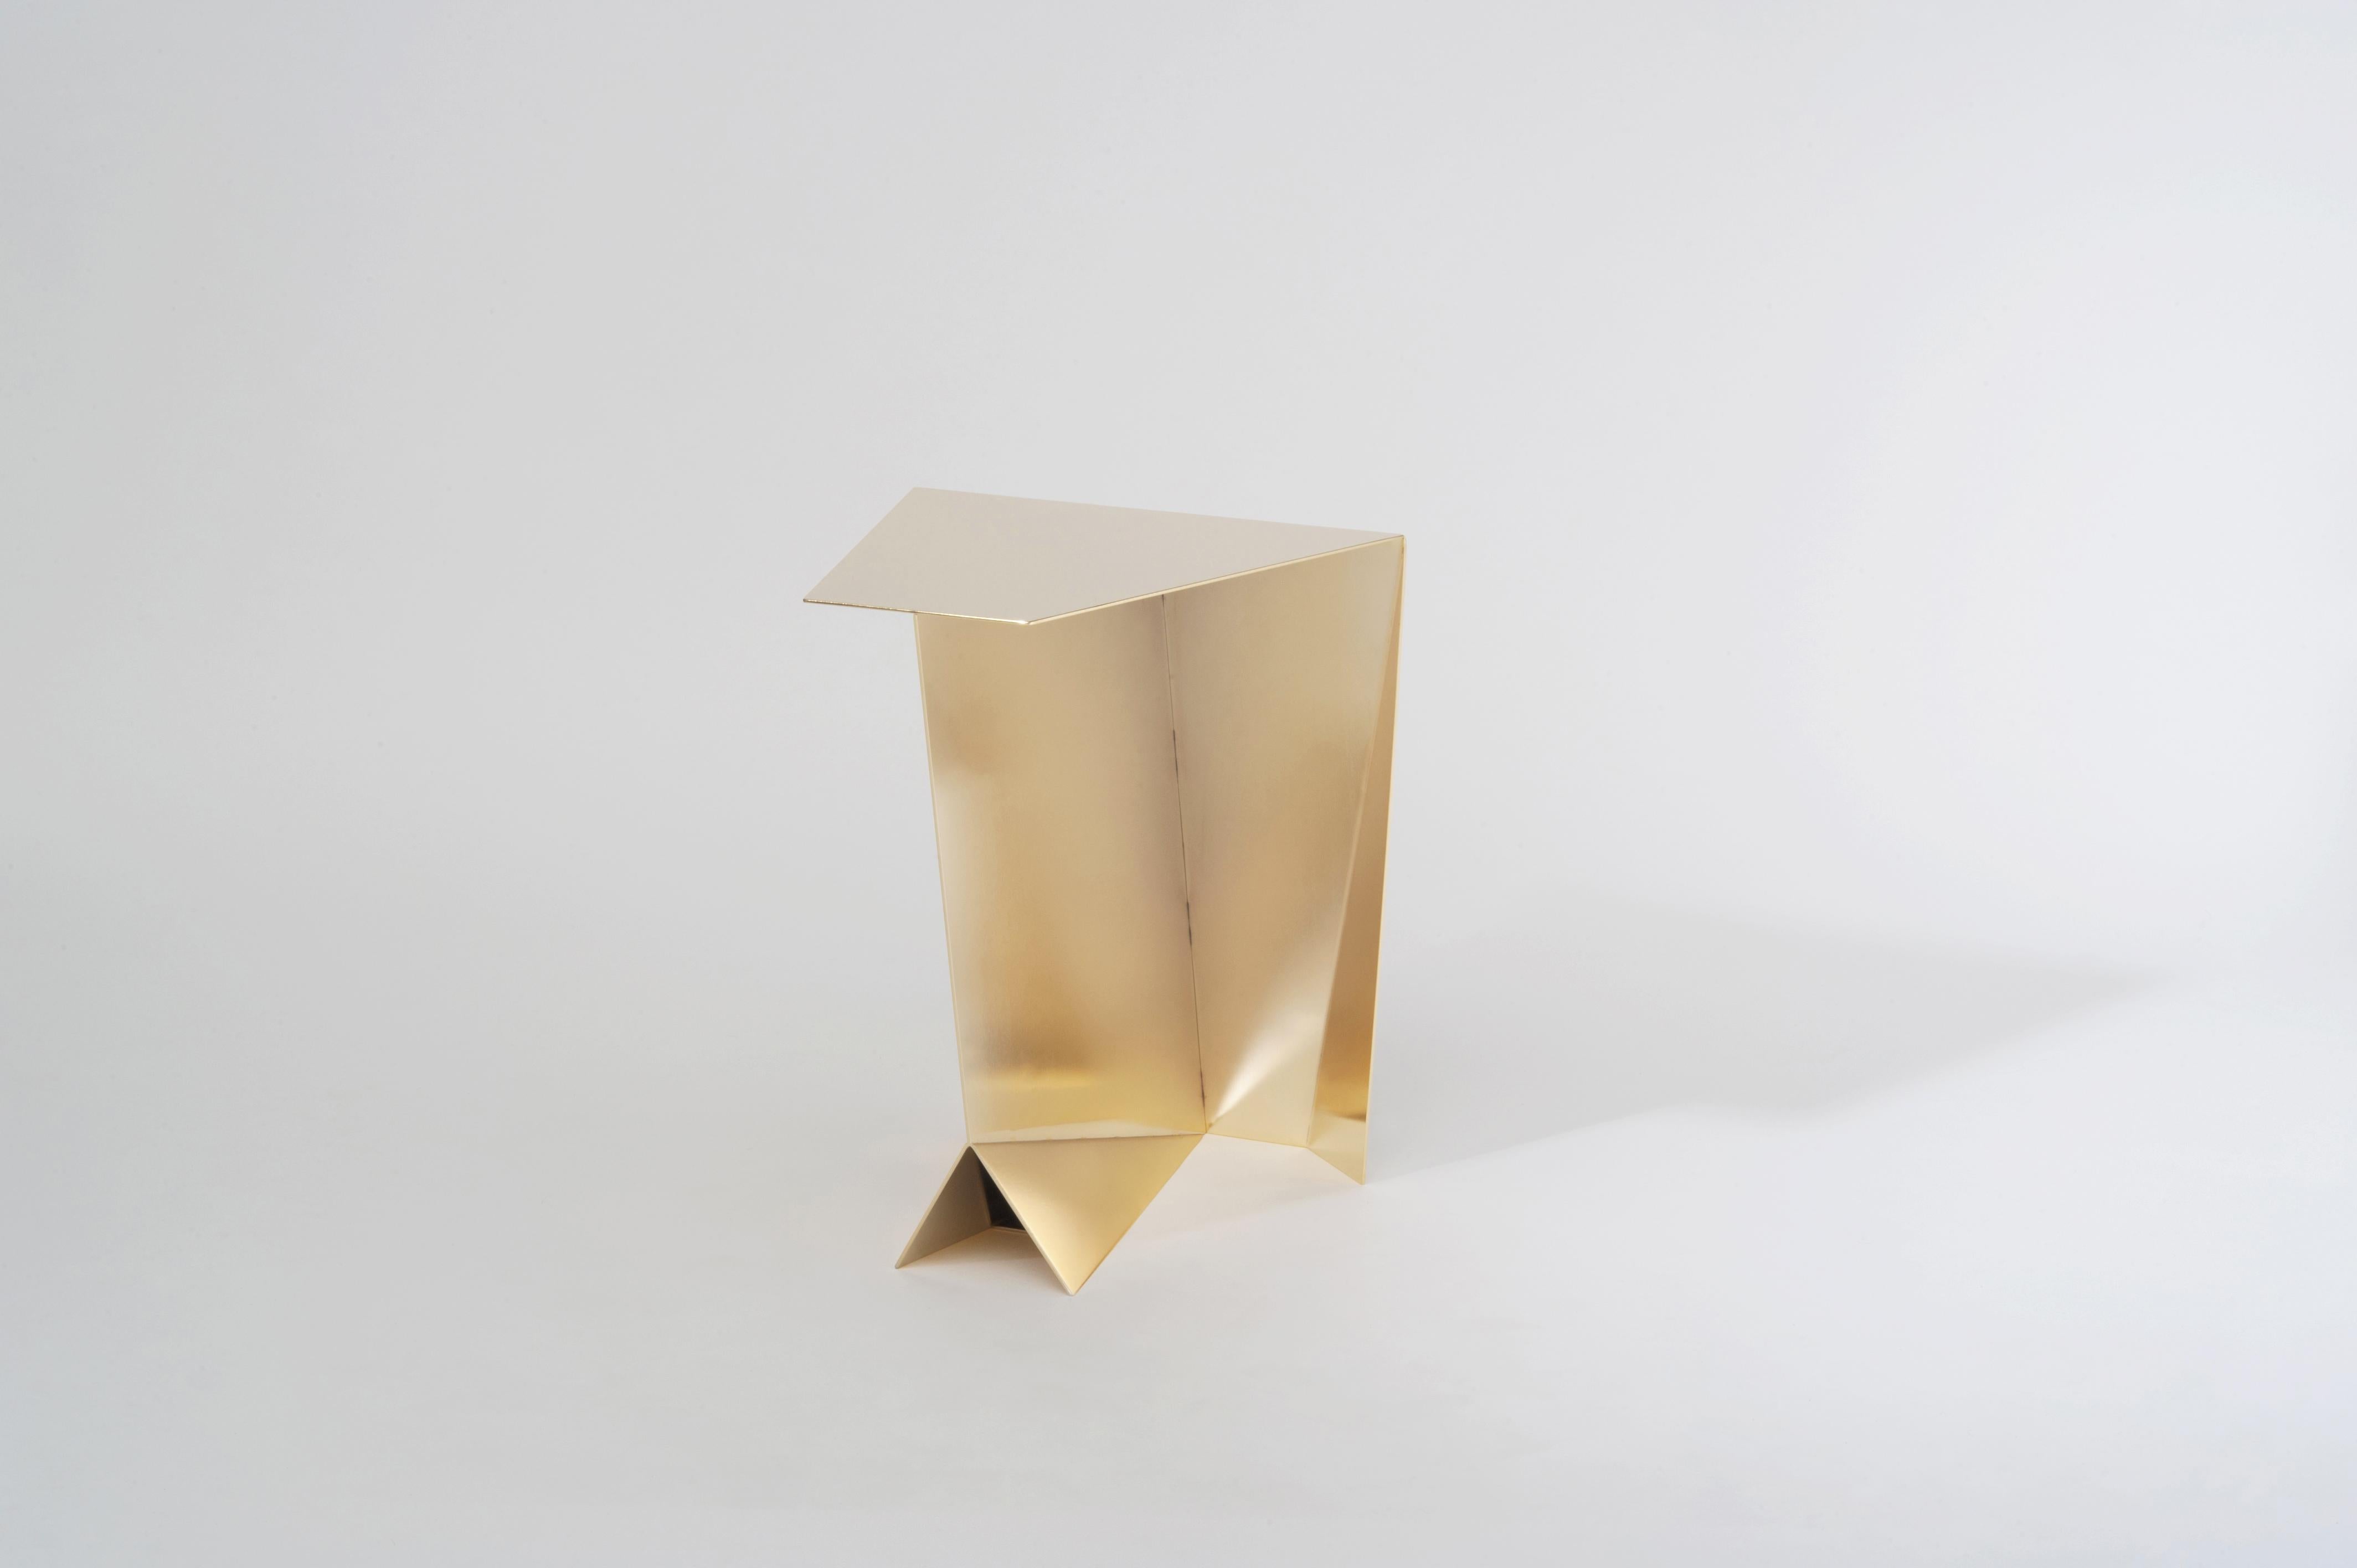 Perseus side table is conceived by 06d design studio

Golden stainless steel. Satin finish.
Measures: 55 x 43 x 43 cm

Limited edition of 33 pieces.